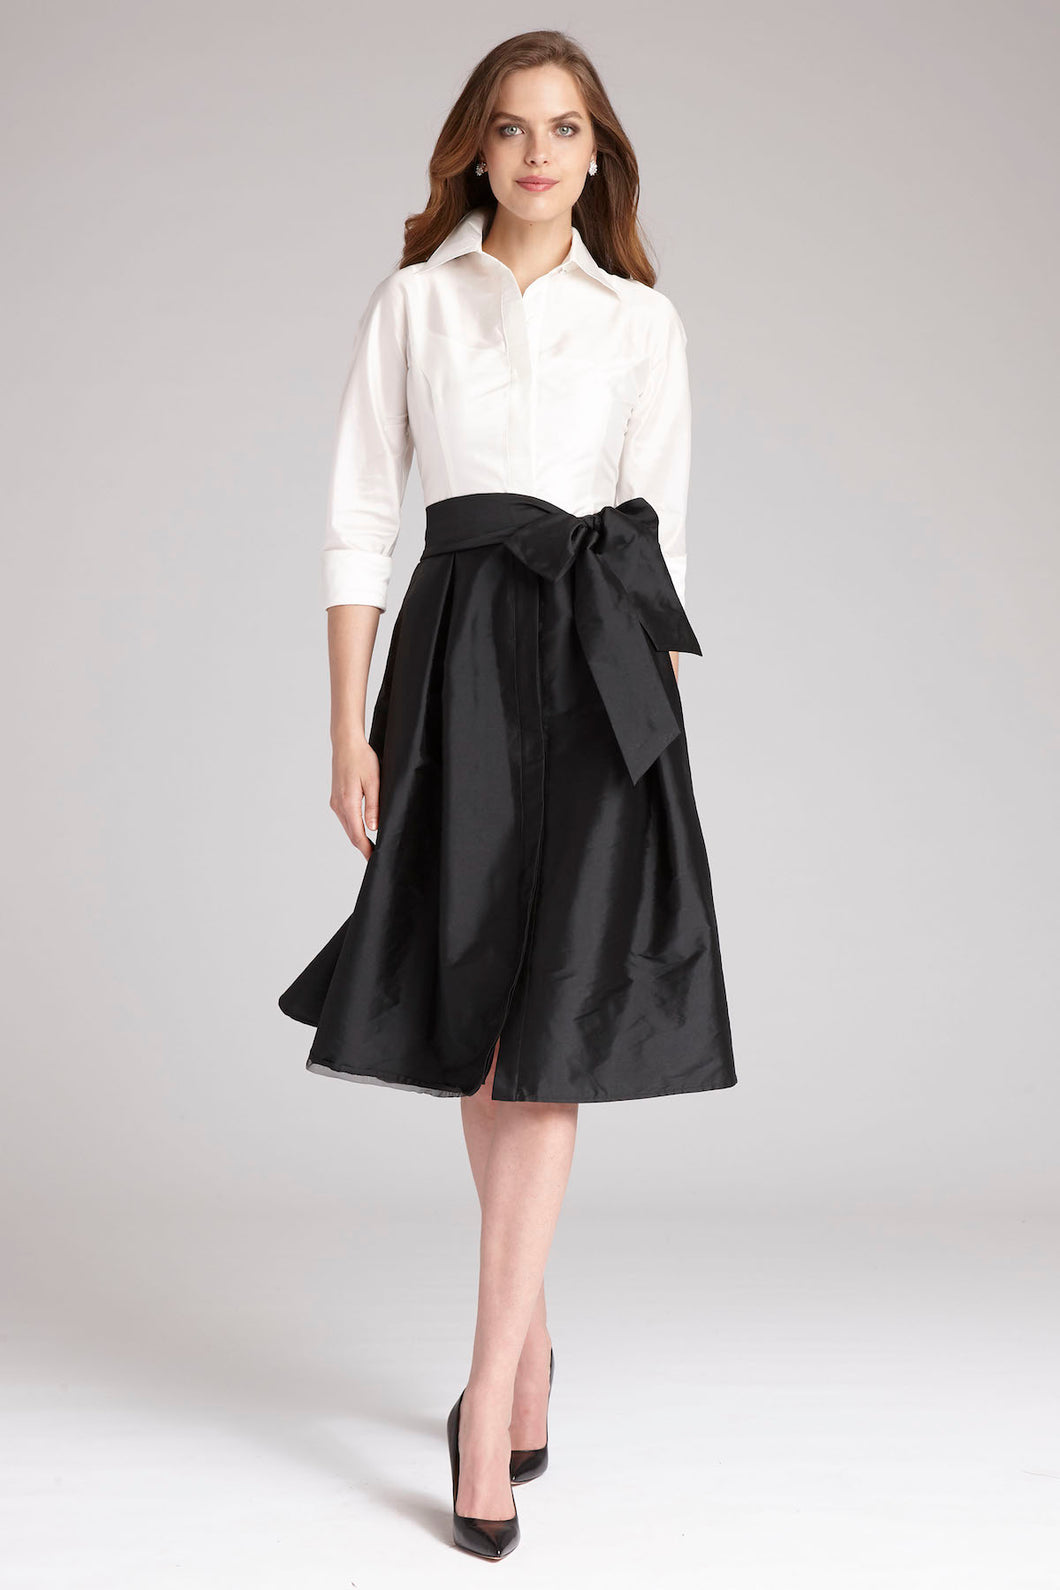 Buy ASHTAG | Satin Shirt Dress with a Belt | Satin or Formal Wear | Perfect  Casual Day Outing Dress | Complete Your 9 am to 9 pm Fashion | Off White |  XS at Amazon.in